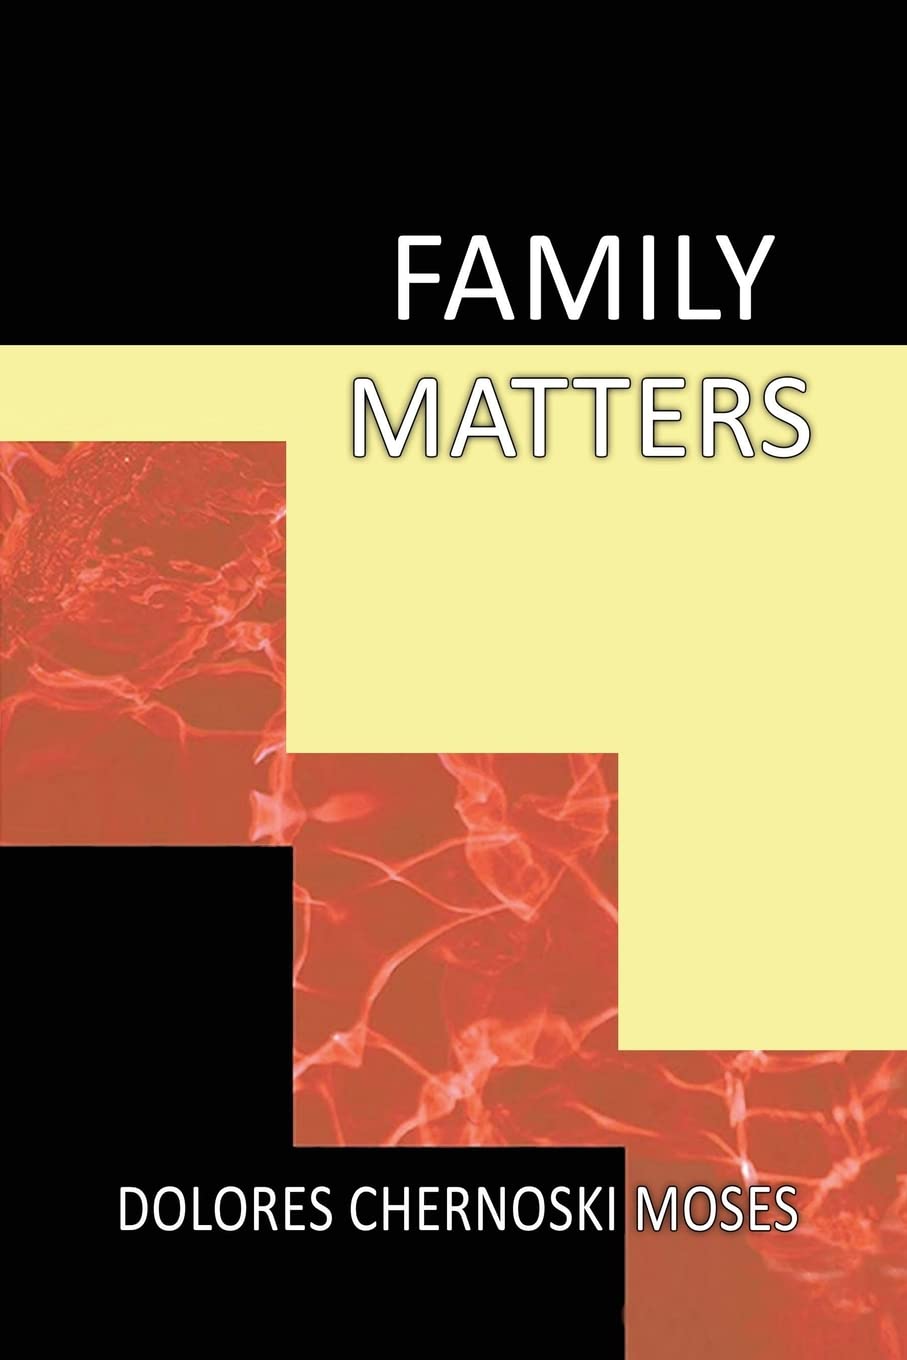 Author's Tranquility Press presents "Family Matters: A Novel Examining the Disjunct between Upward-Mobile Successful Technocrats and Their Blue-Collar Counterparts"